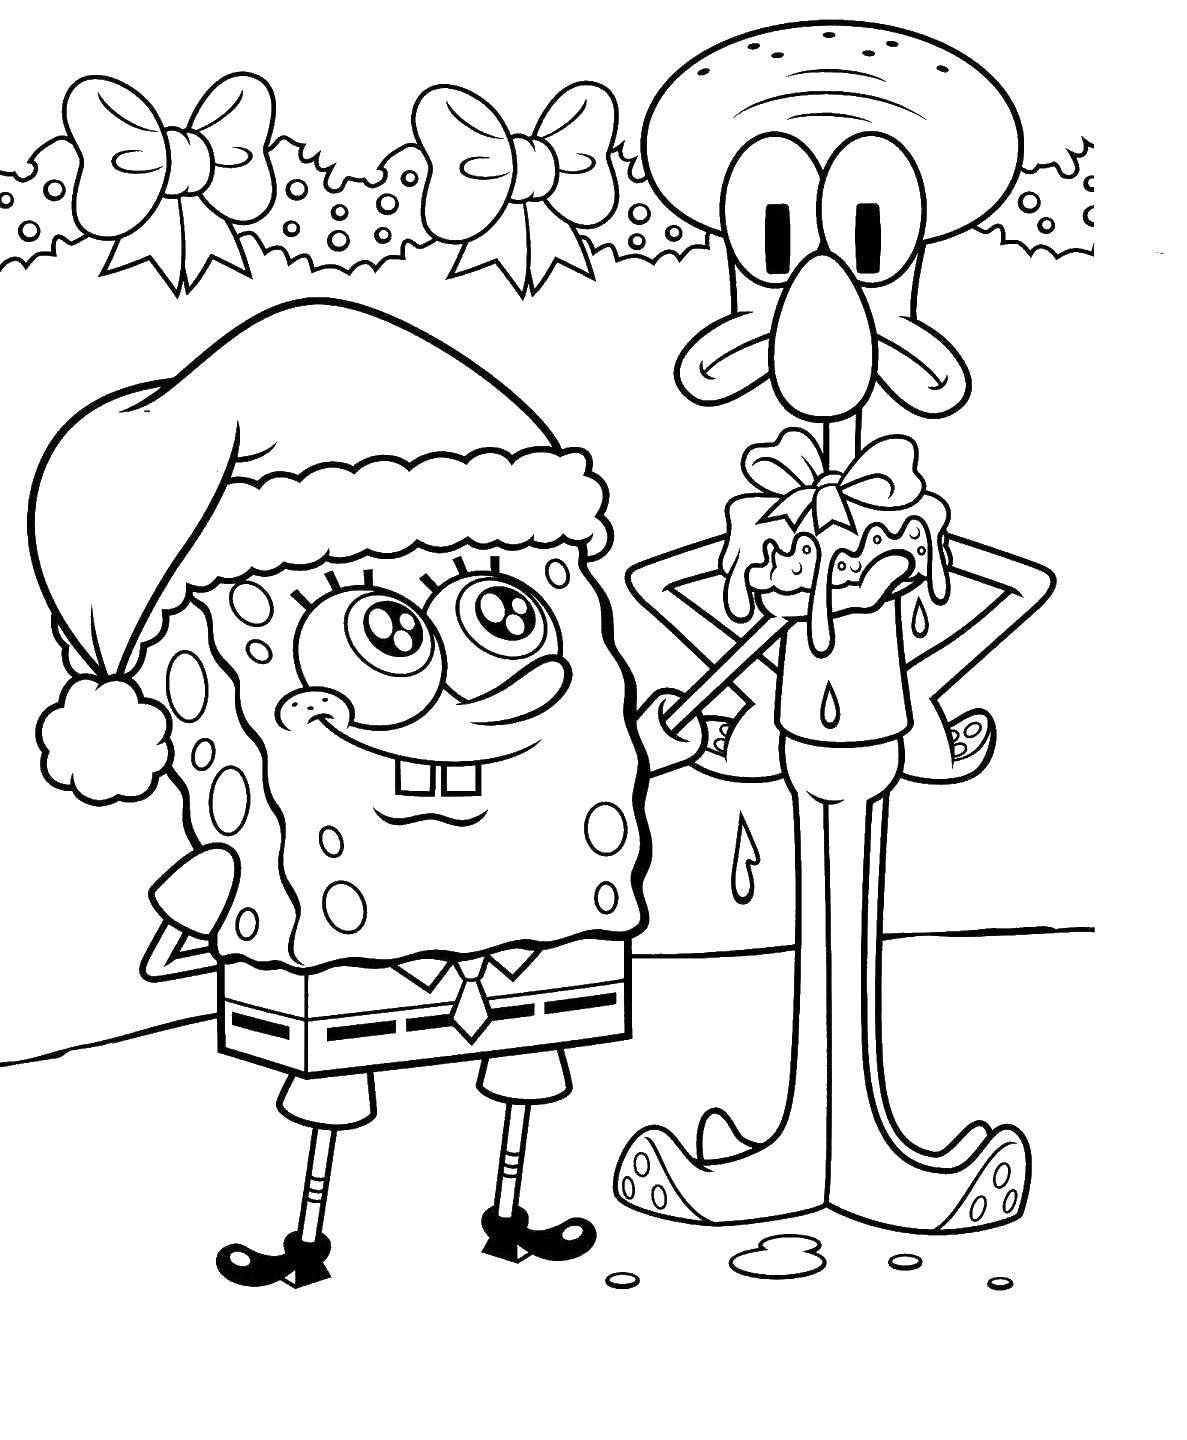 Coloring Spongebob and squidward. Category Christmas. Tags:  Christmas, gifts.